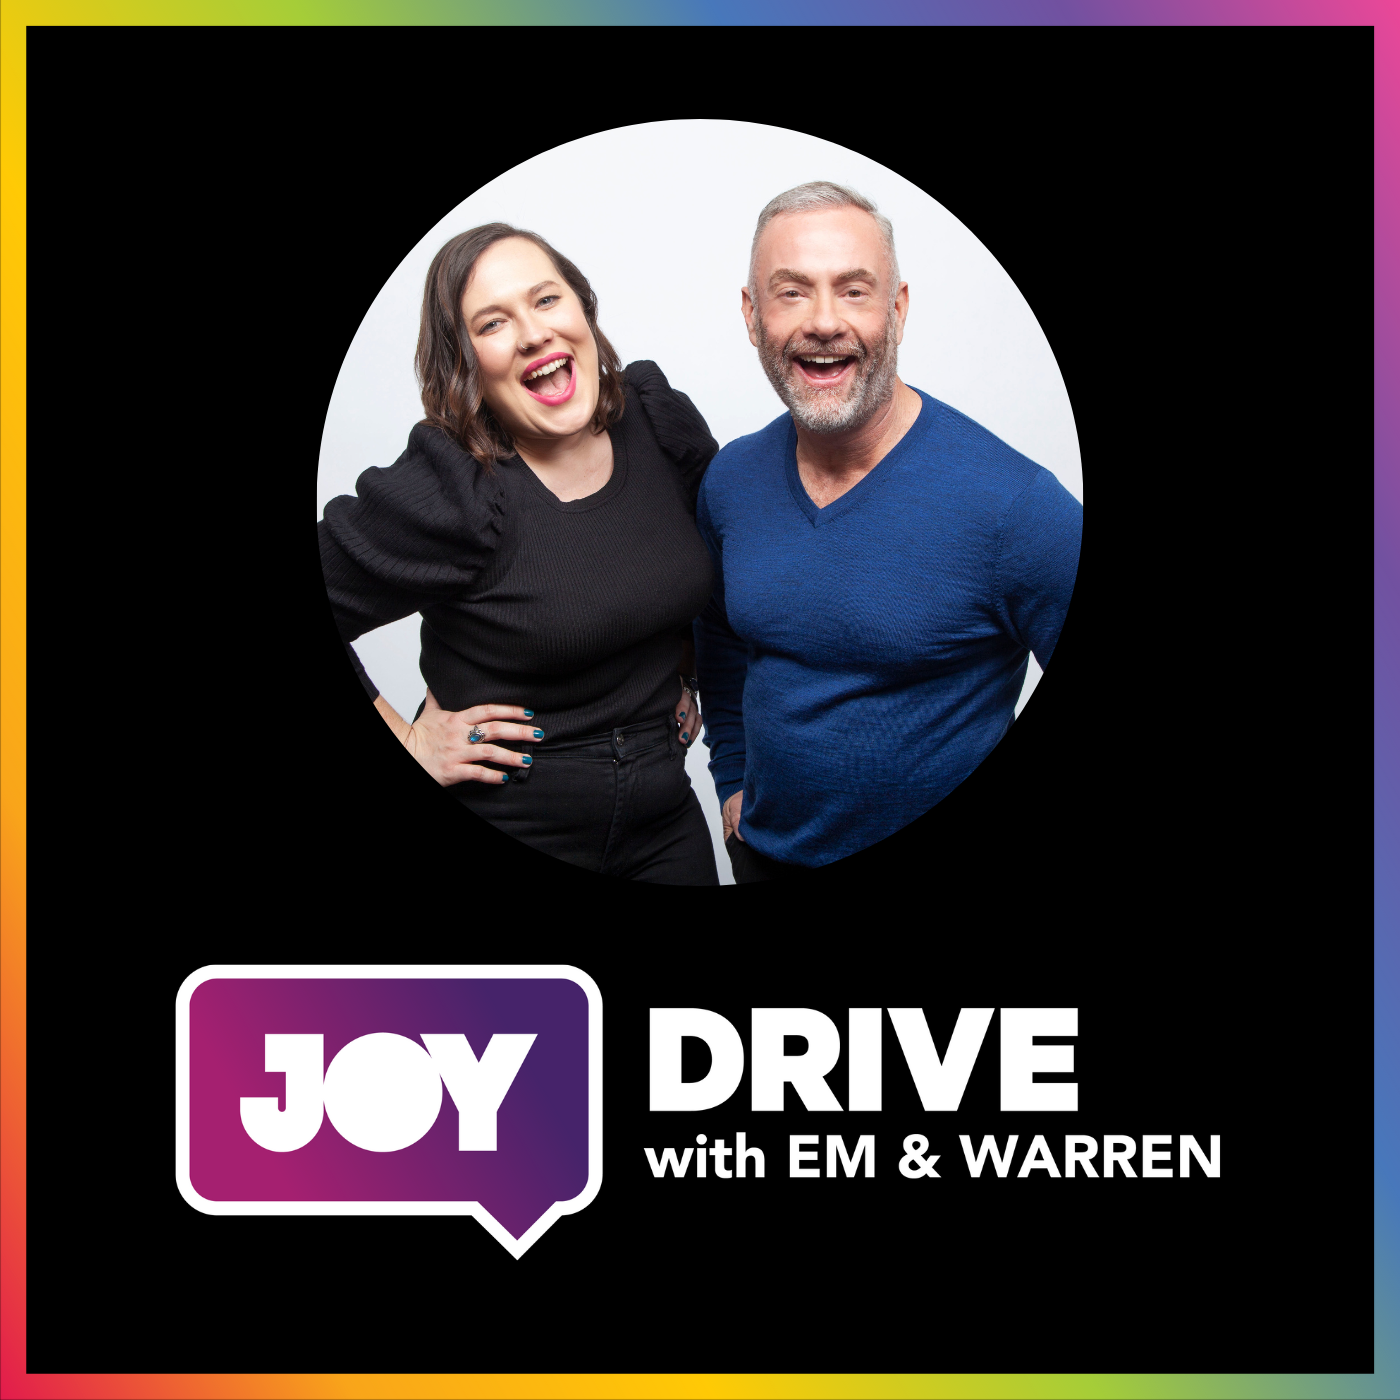 Julie McCrossin and Jude Munro x JOY Drive: 50 Years of Gay Liberation